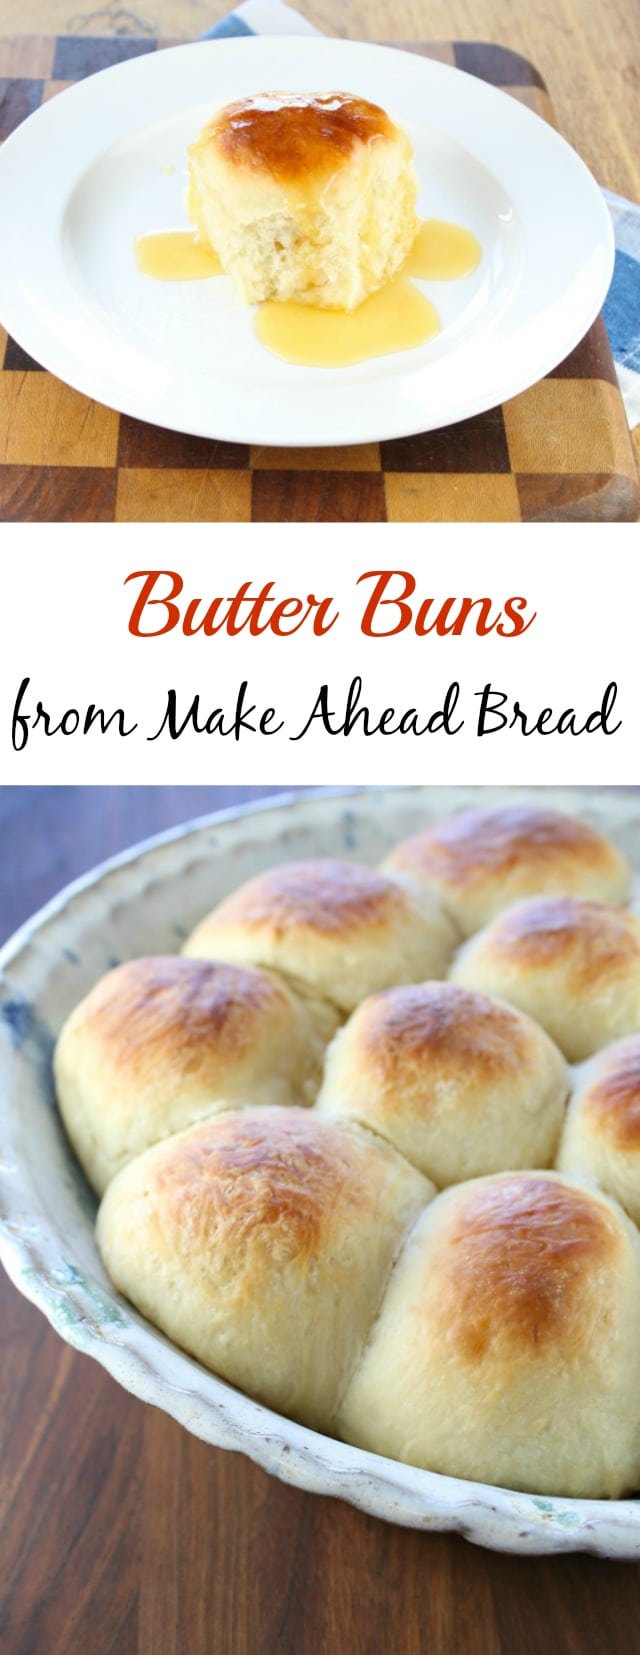 Butter Buns from Make Ahead Bread